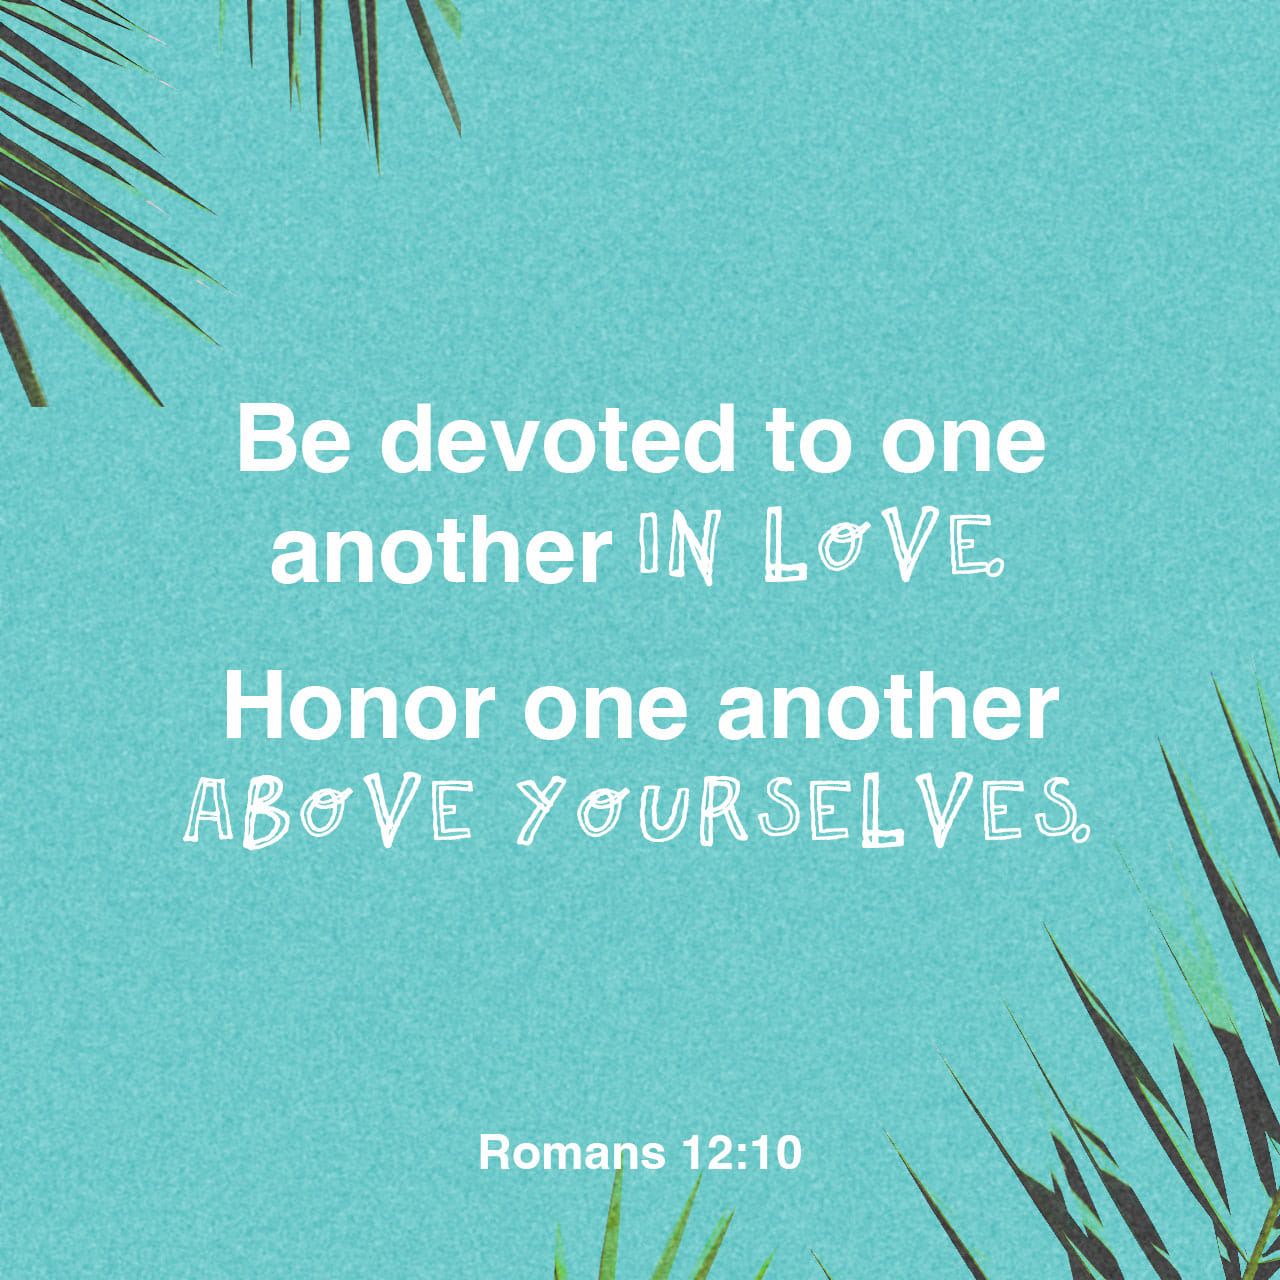 Be devoted to one another IN LoVE Honor one another ABVE YoURSELVES Romans 12:10